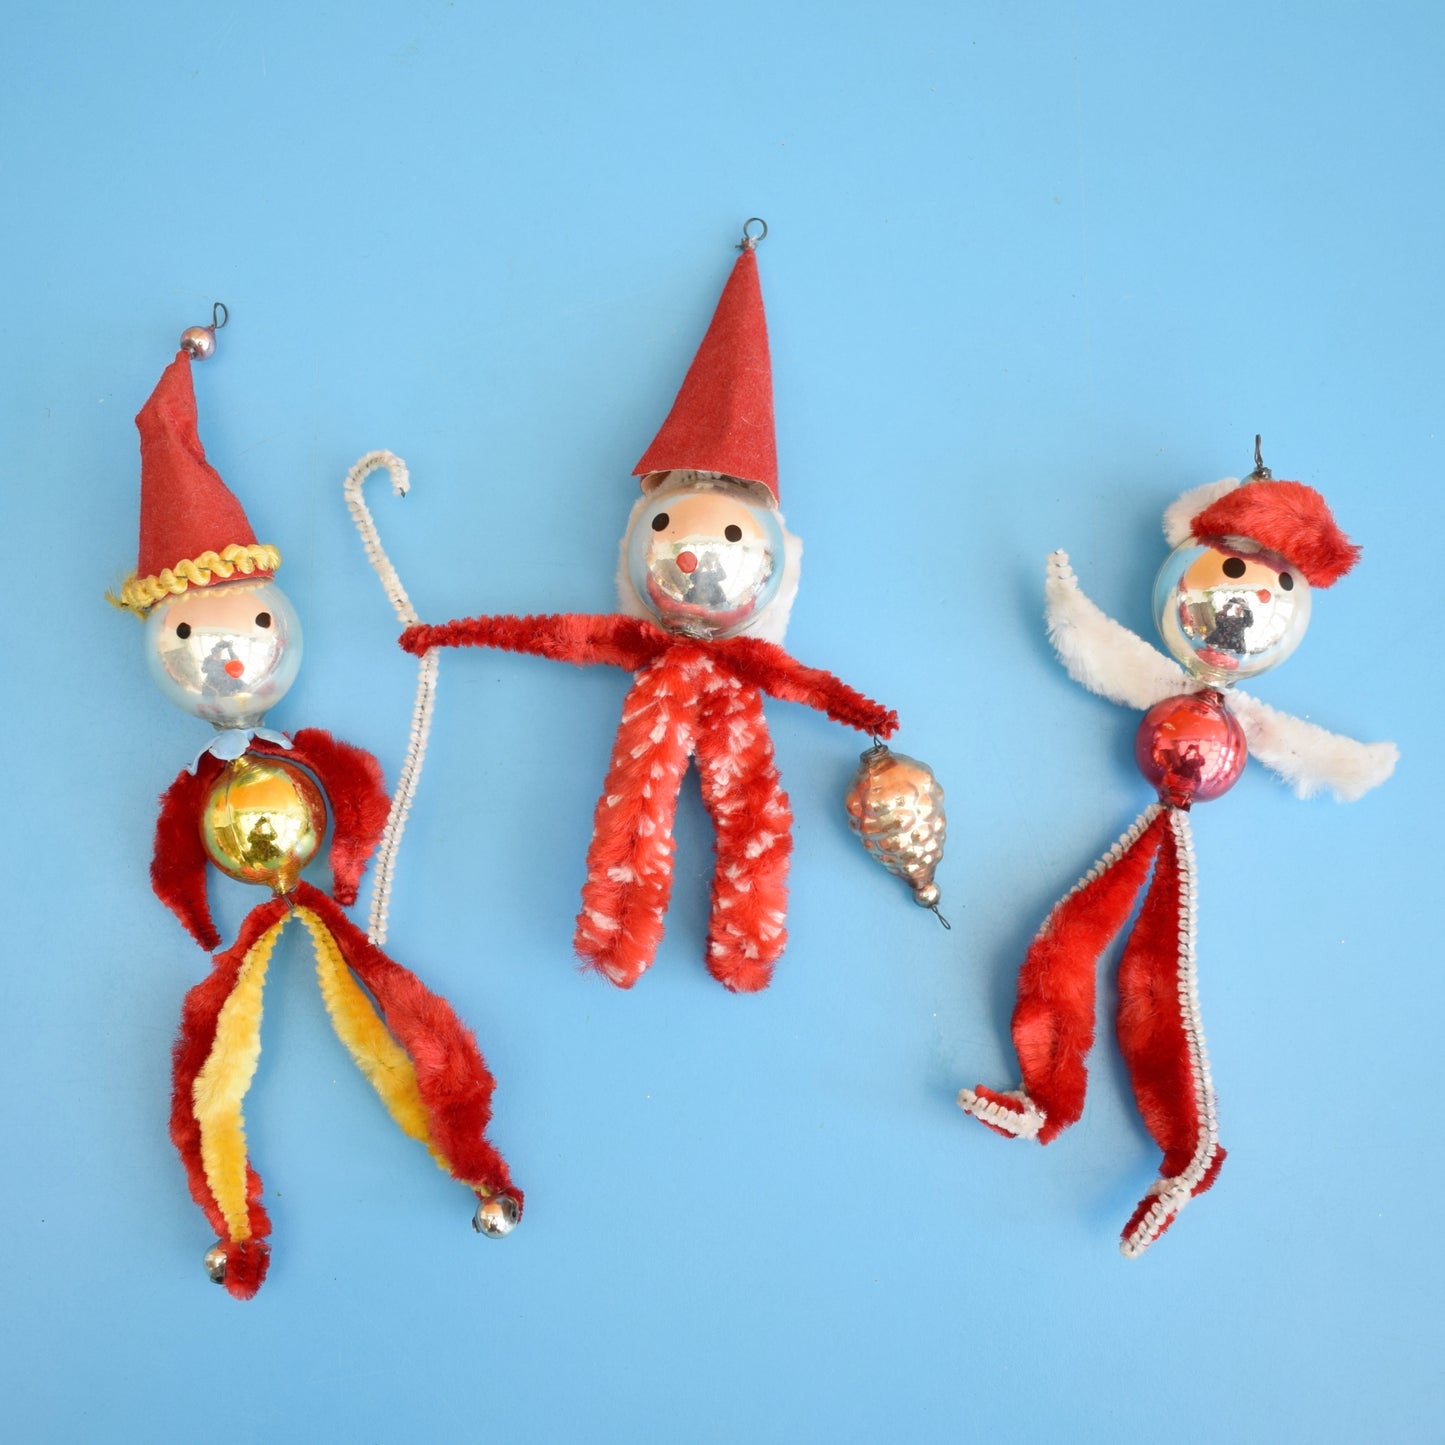 Vintage 1960s Kitsch Pipe Cleaner Decorations x3